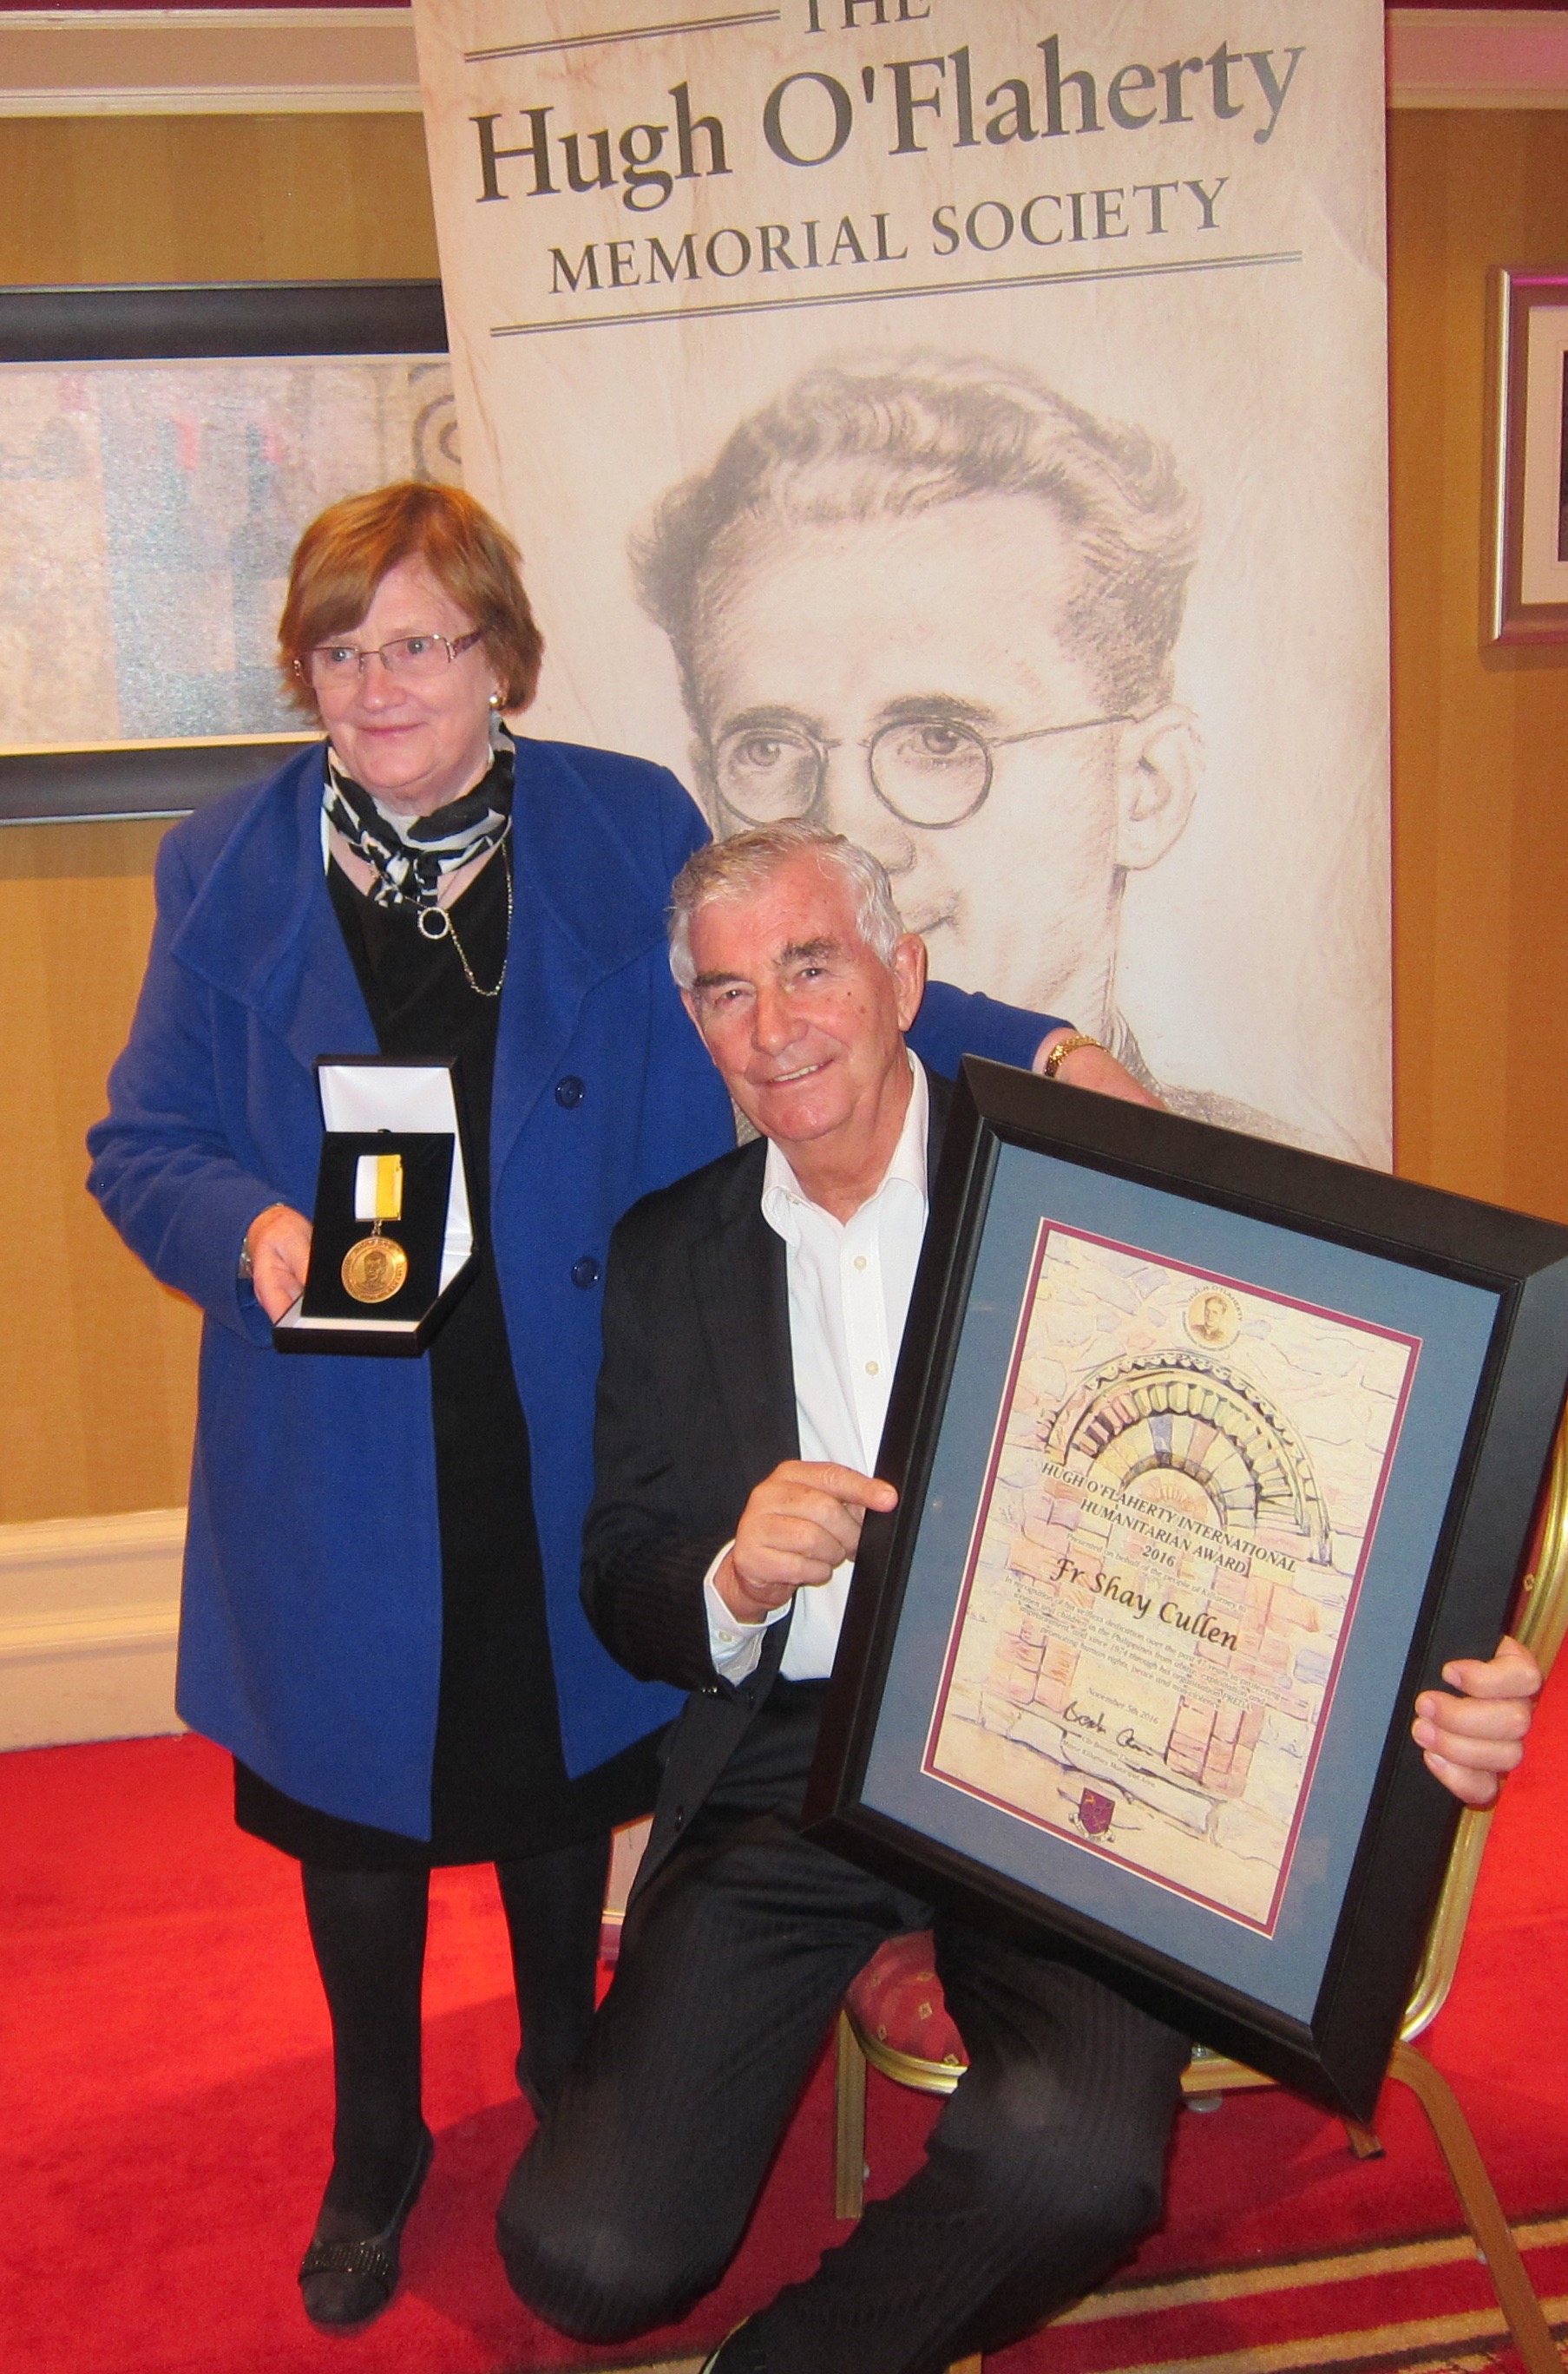 The grand niece of Mons.Hugh O'Flaherty presents the Mons.Hugh O'Flaherty International Humanitarian Award medal and plaque to Father Shay Cullen,of the Preda Foundation which he founded in 1974 to save women and children from jails, abusers and human traffickers. The award was presented in Killarney, Ireland on 5 November 2016 